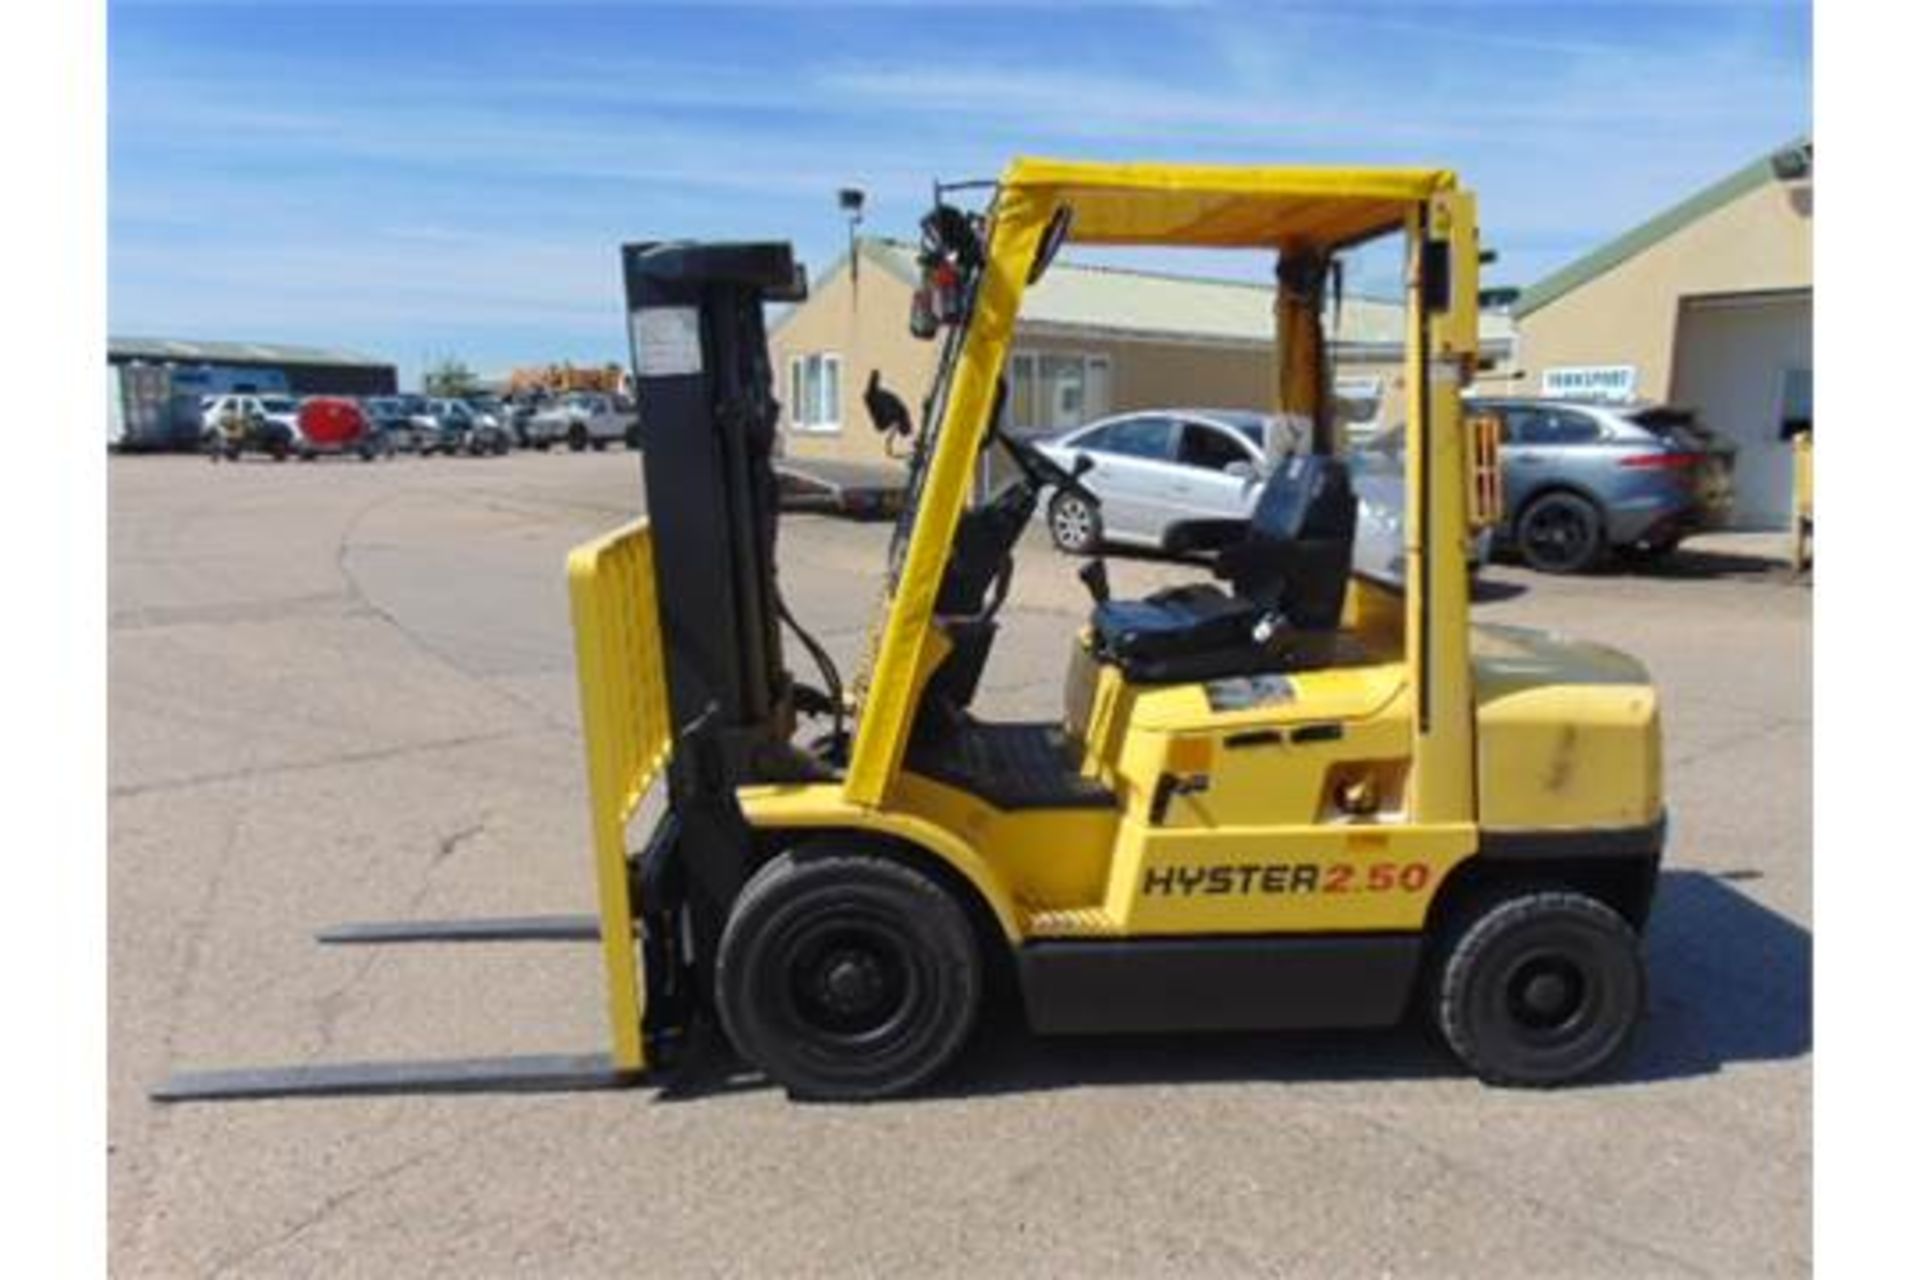 Hyster 2.50 Diesel Forklift ONLY 763.4 hours!! - Image 4 of 28